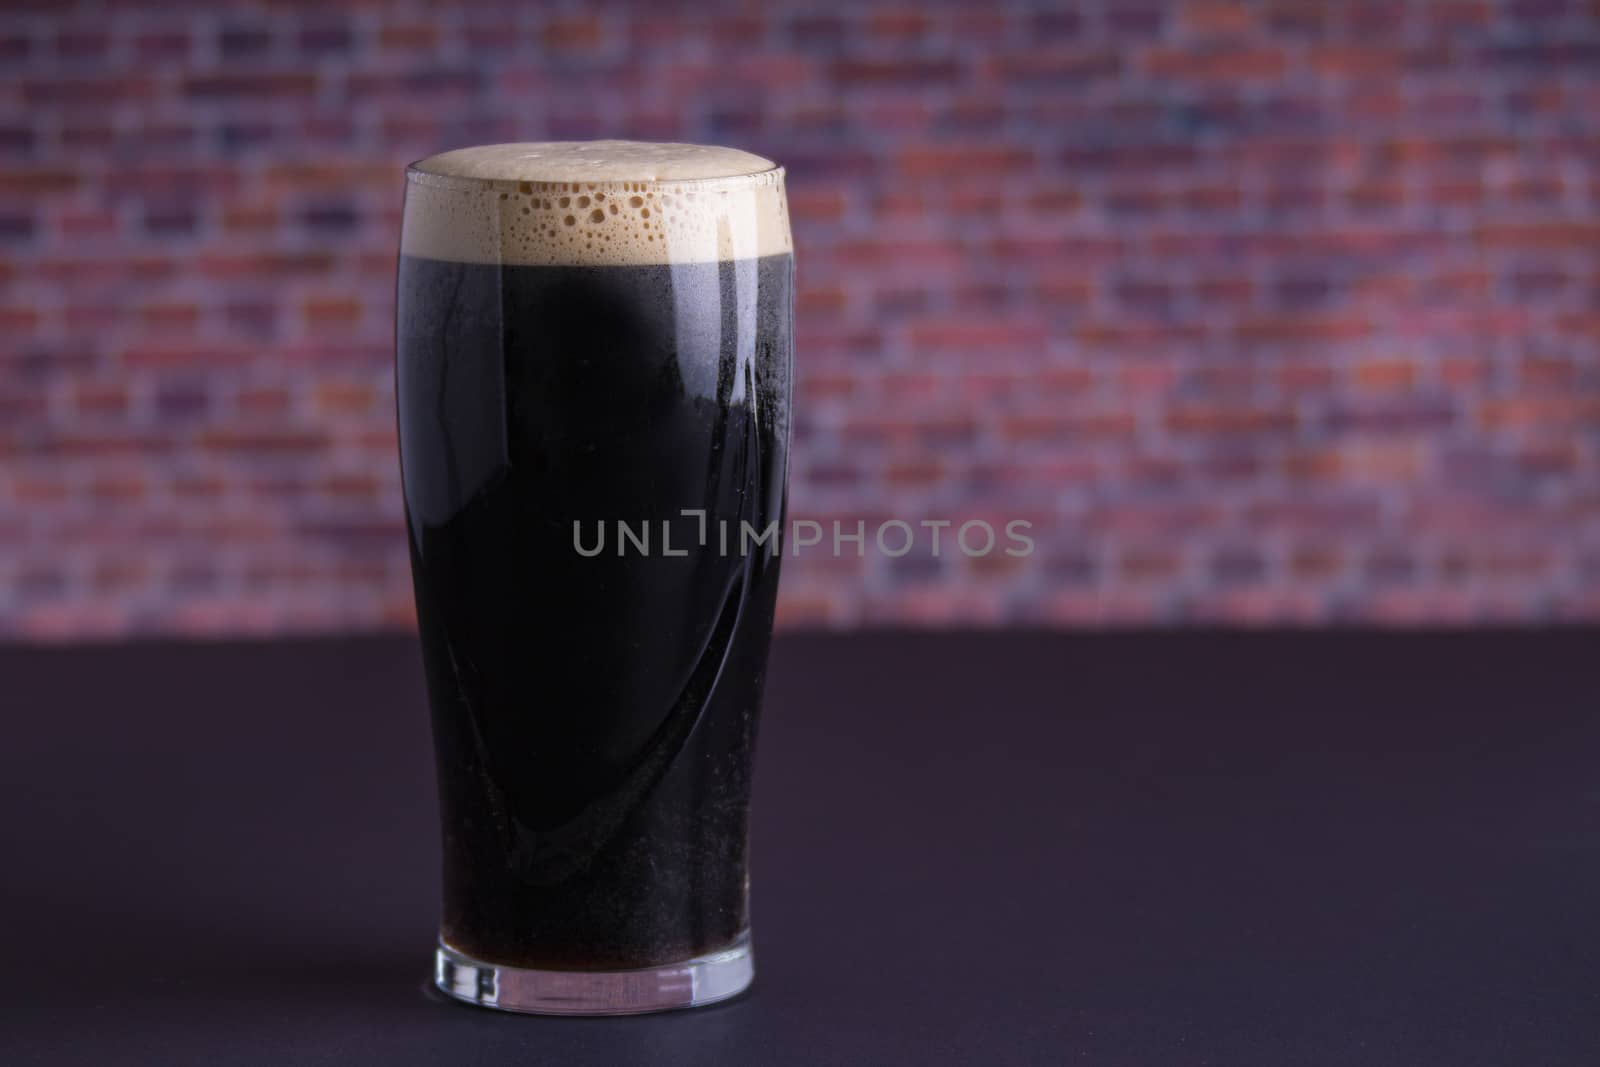 A Guinness dark Irish dry stout beer glass that originated in the brewery in dublin horizontal view